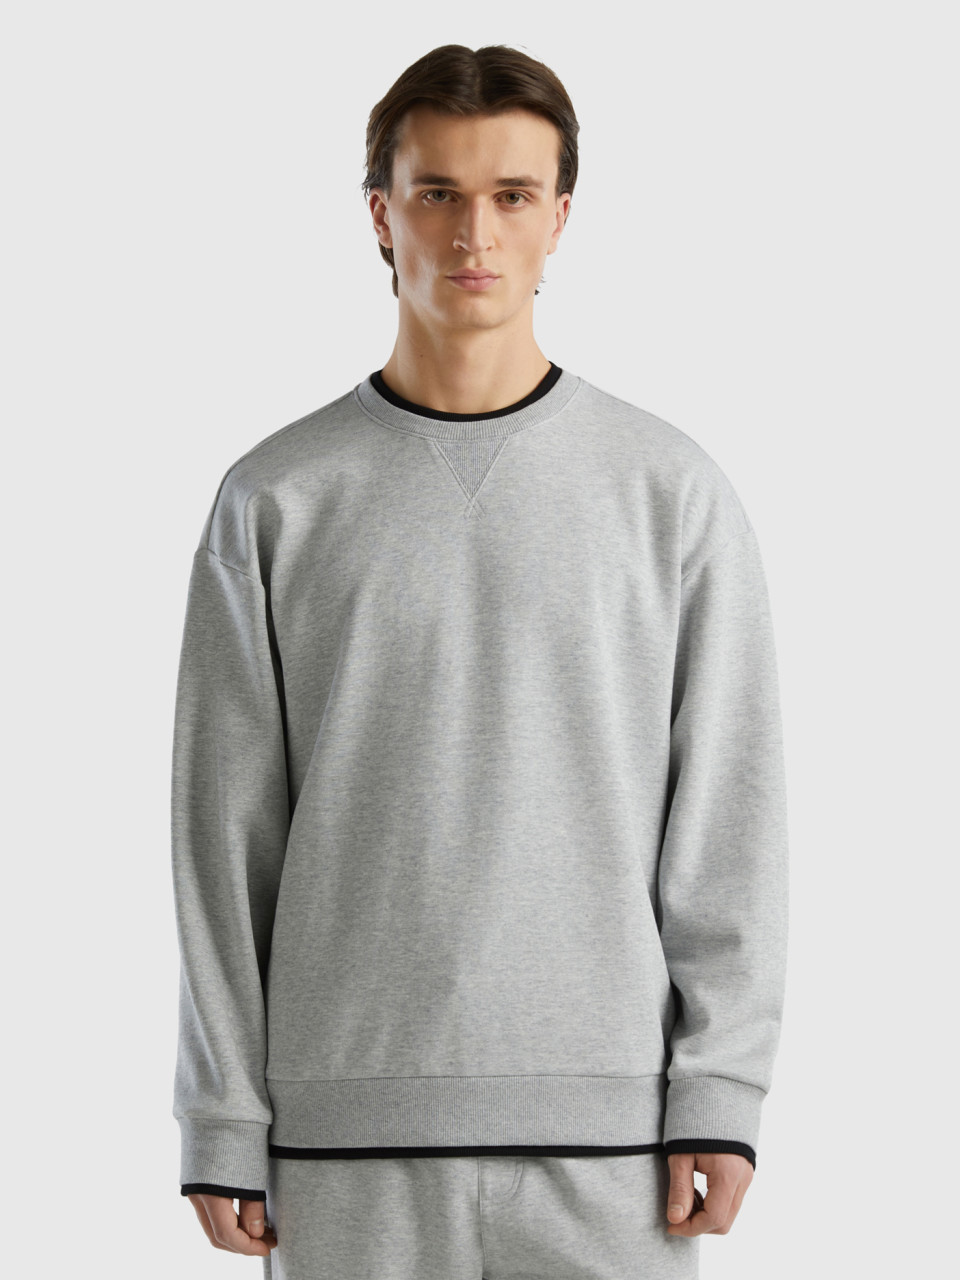 Benetton, Sweater Relaxed-fit, Hellgrau, male